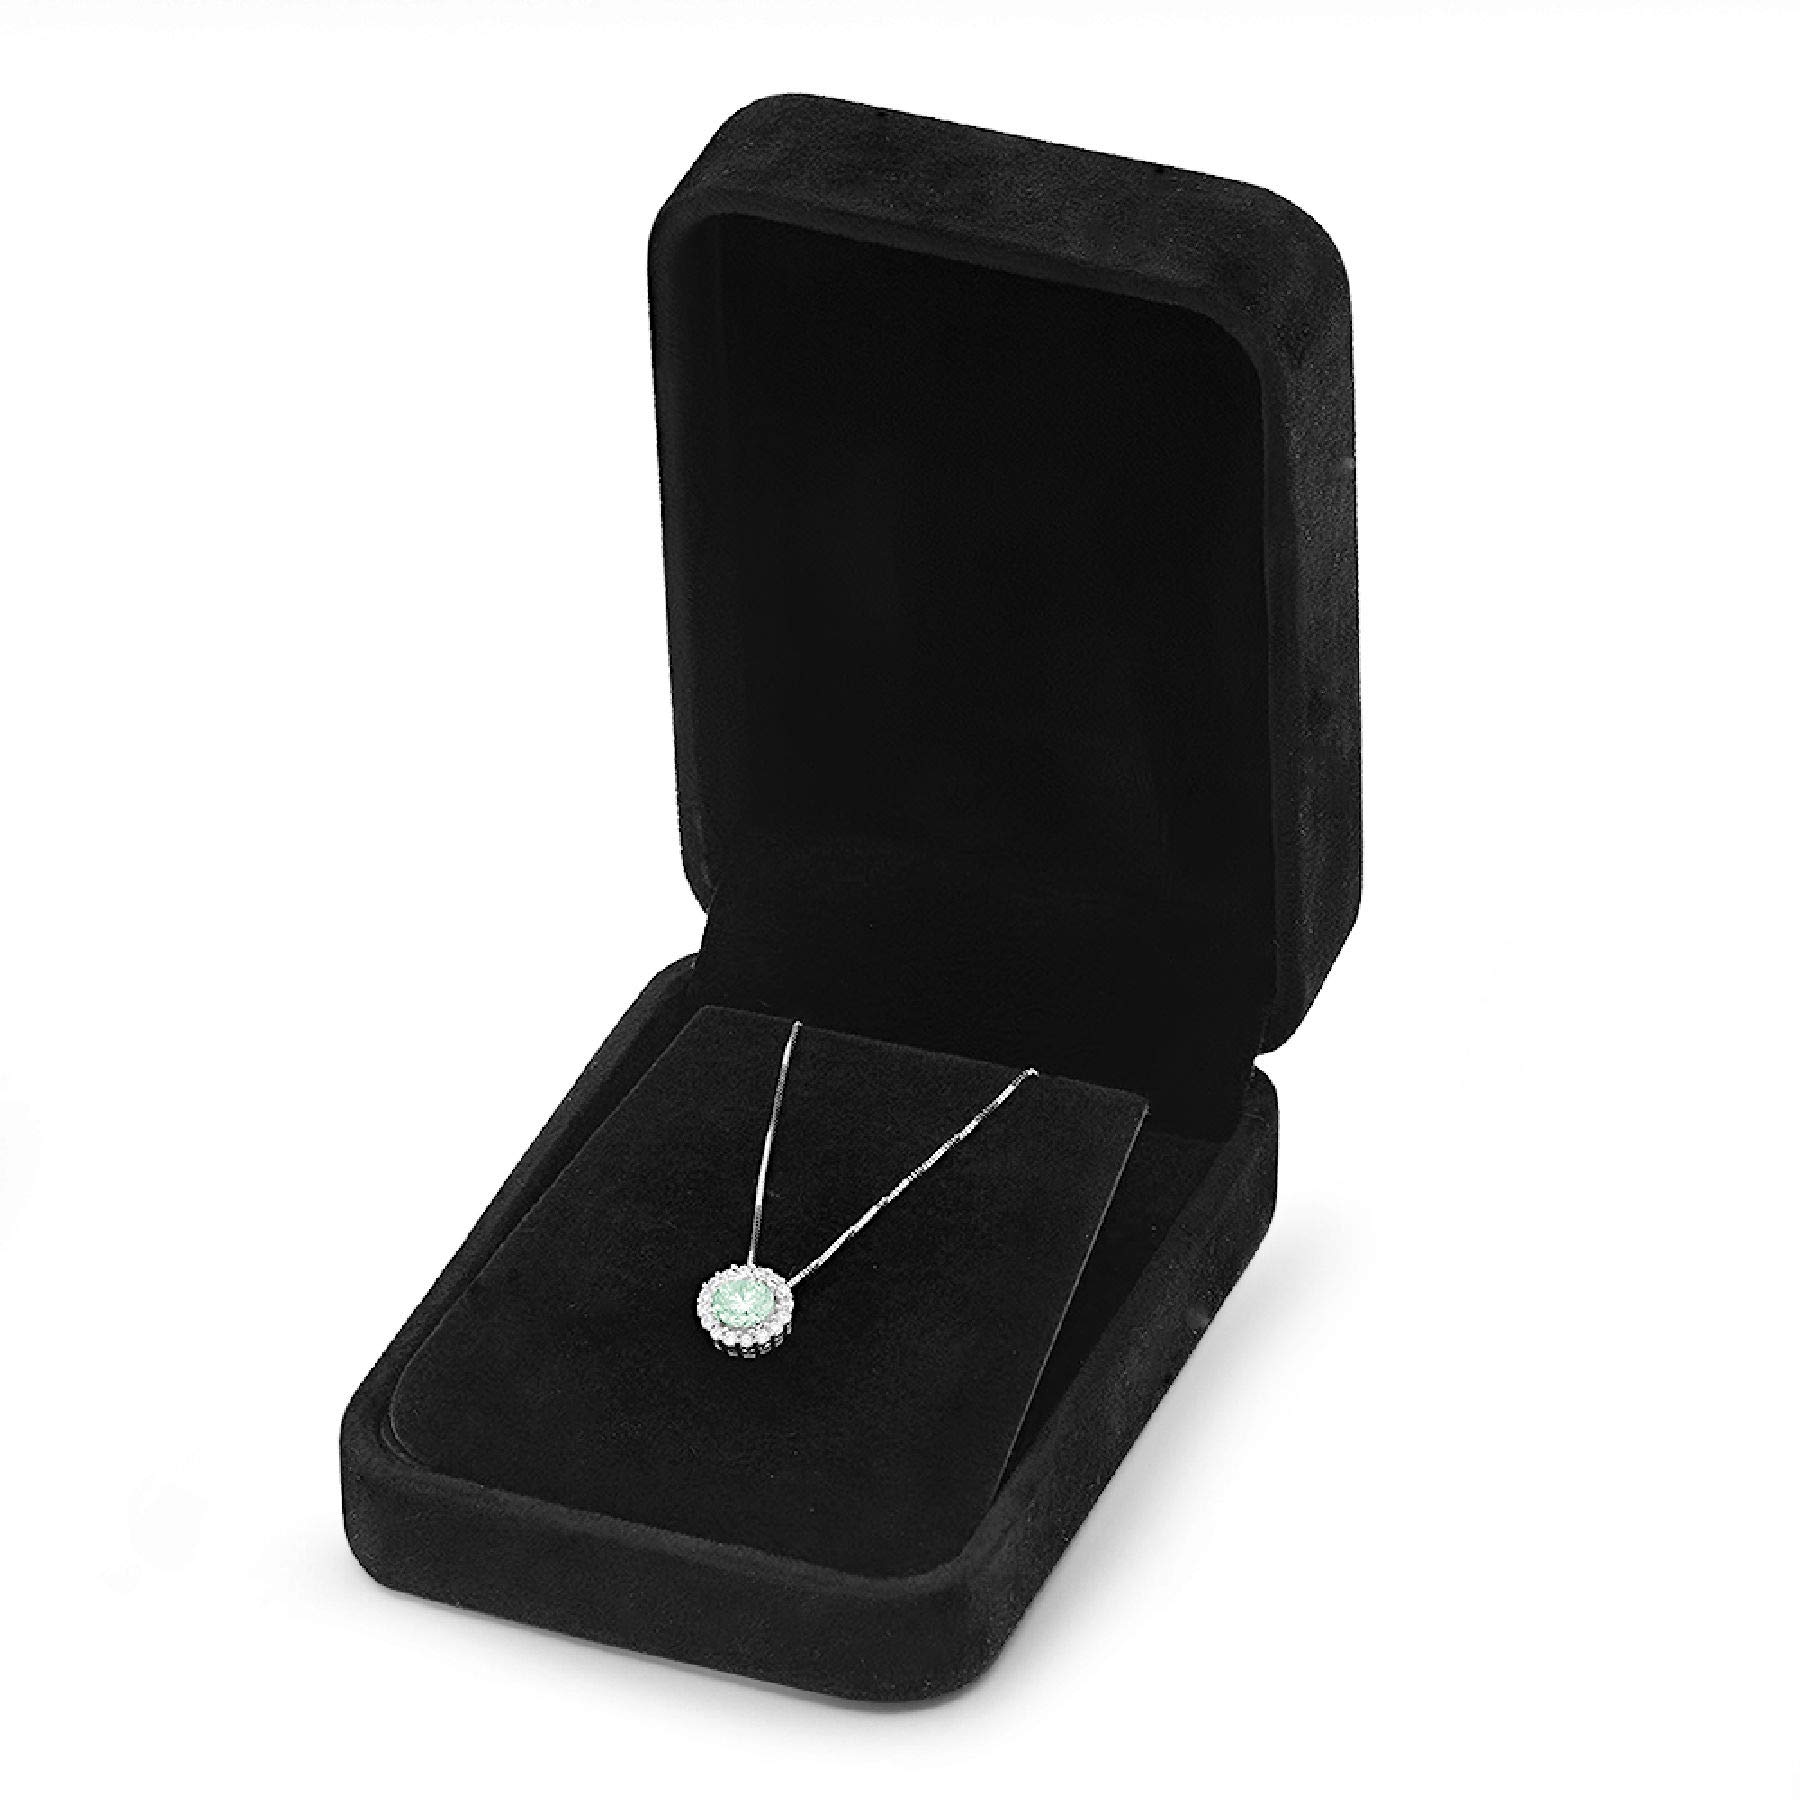 Clara Pucci 1.30 ct Brilliant Round Cut Pave Halo Stunning Genuine Flawless Green Simulated Diamond Gemstone Solitaire Pendant Necklace With 16